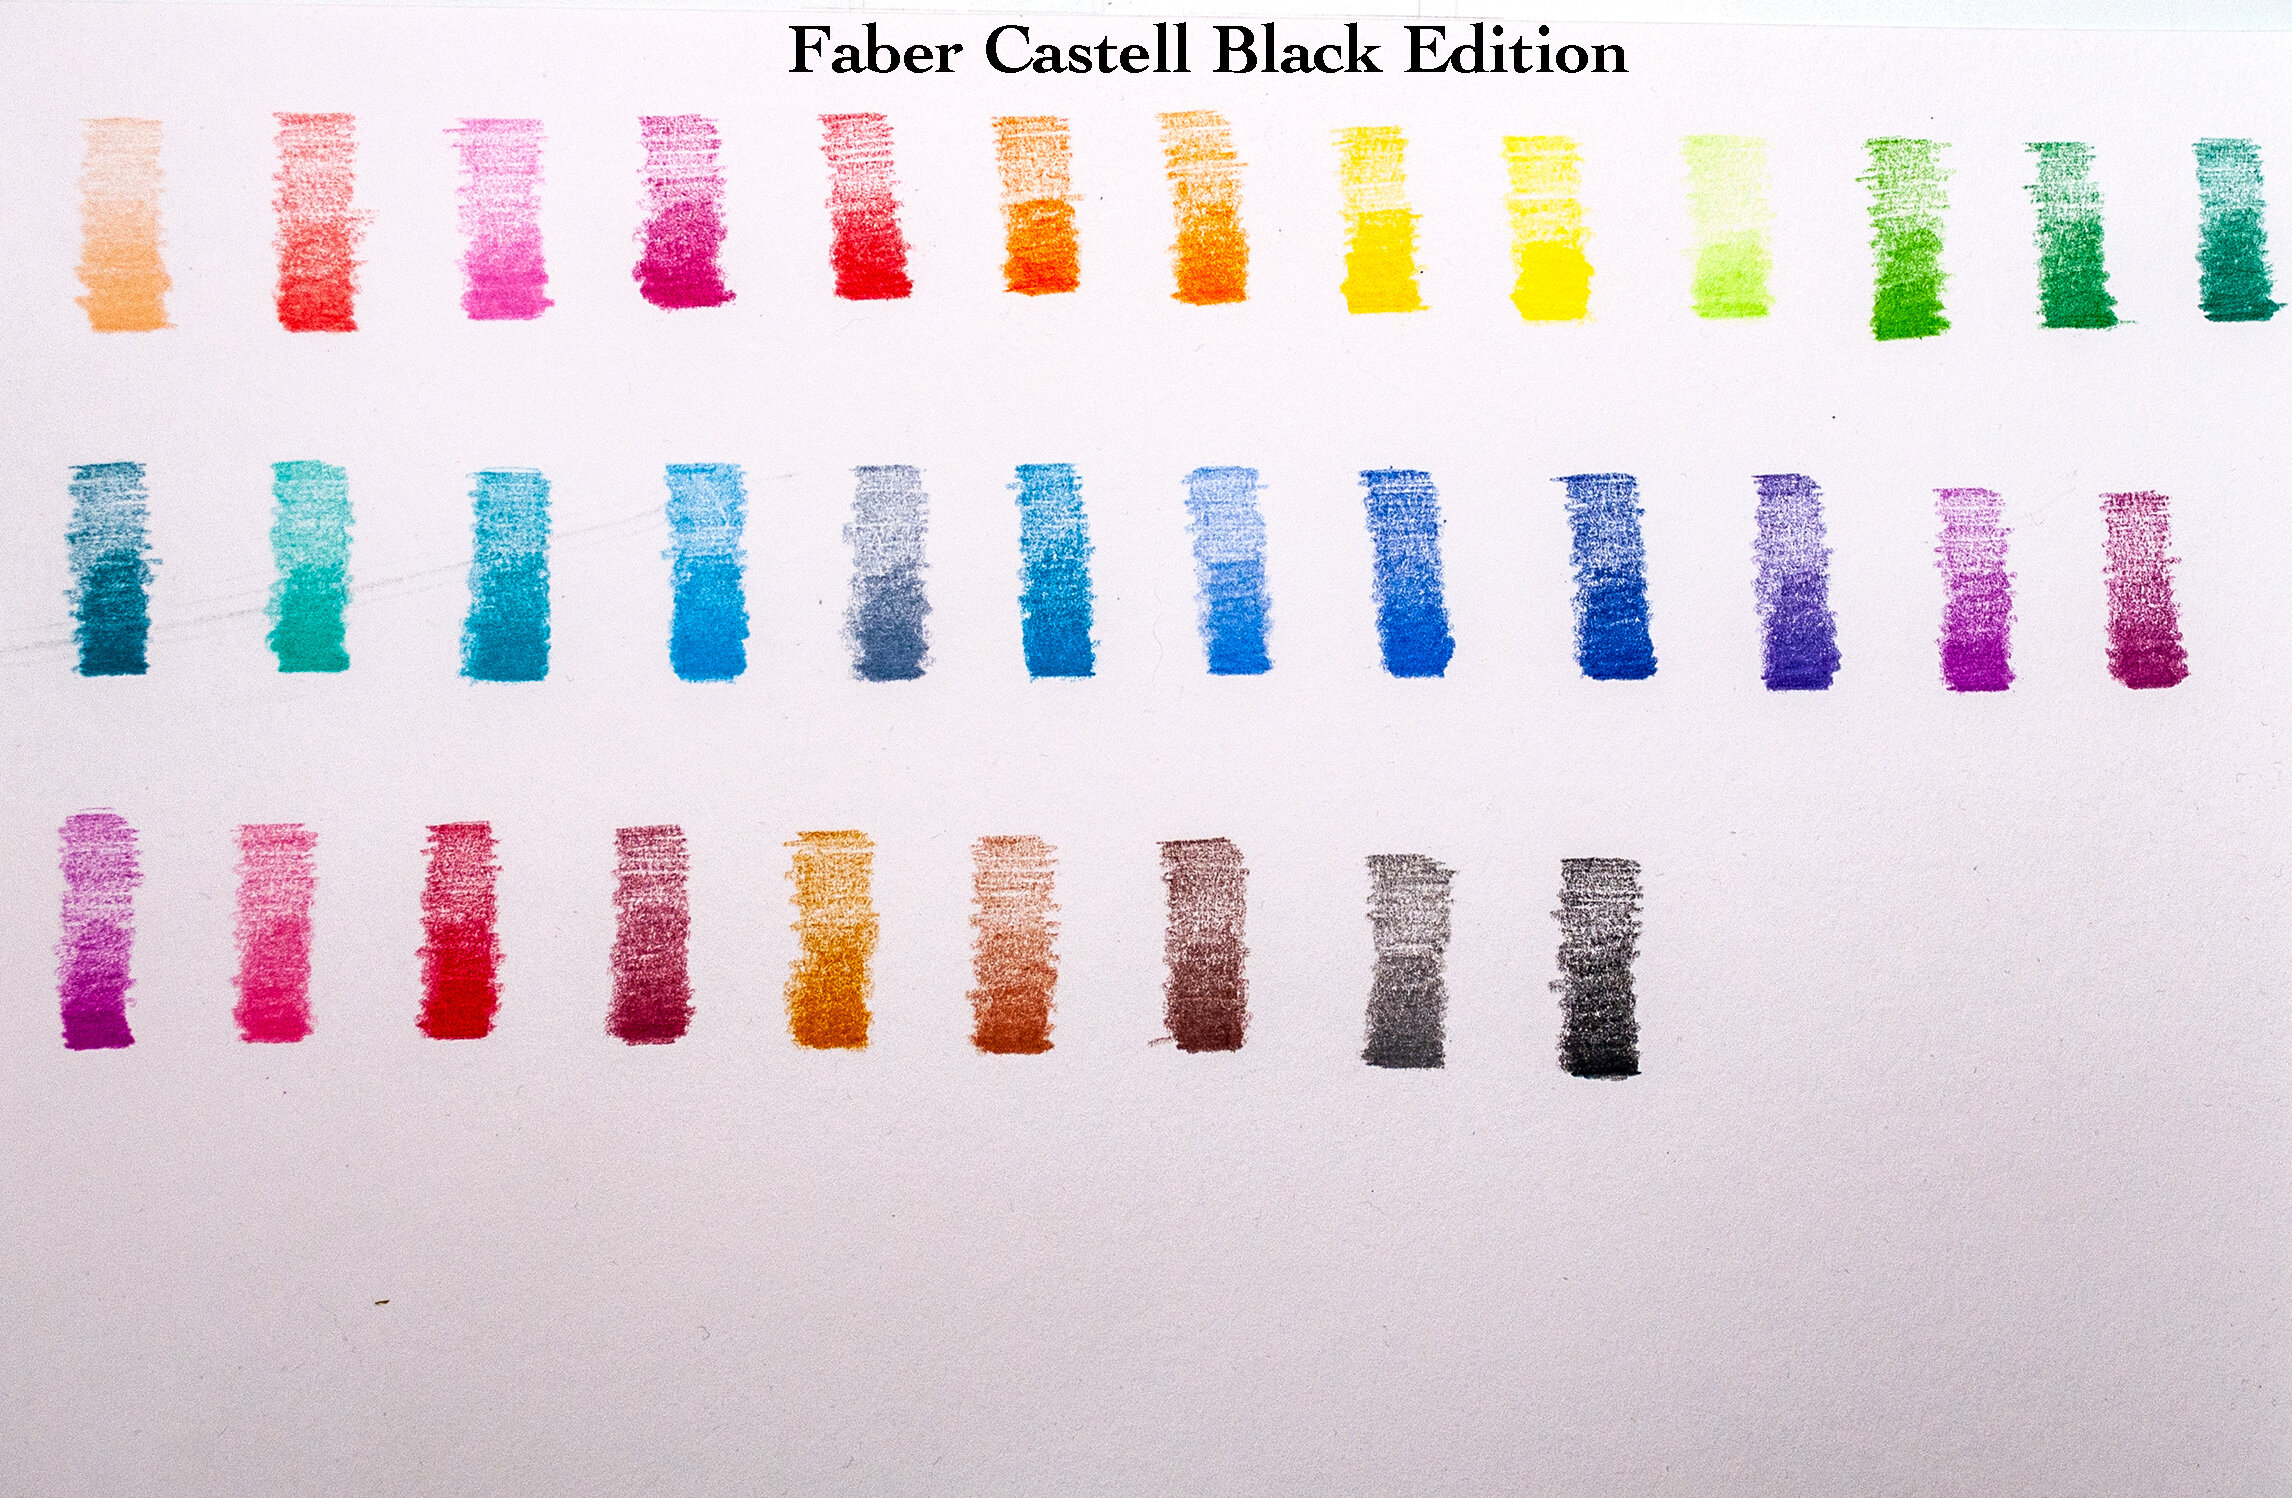 NEW Faber-Castell BLACK EDITION Colored Pencils [Unboxing & Review] 